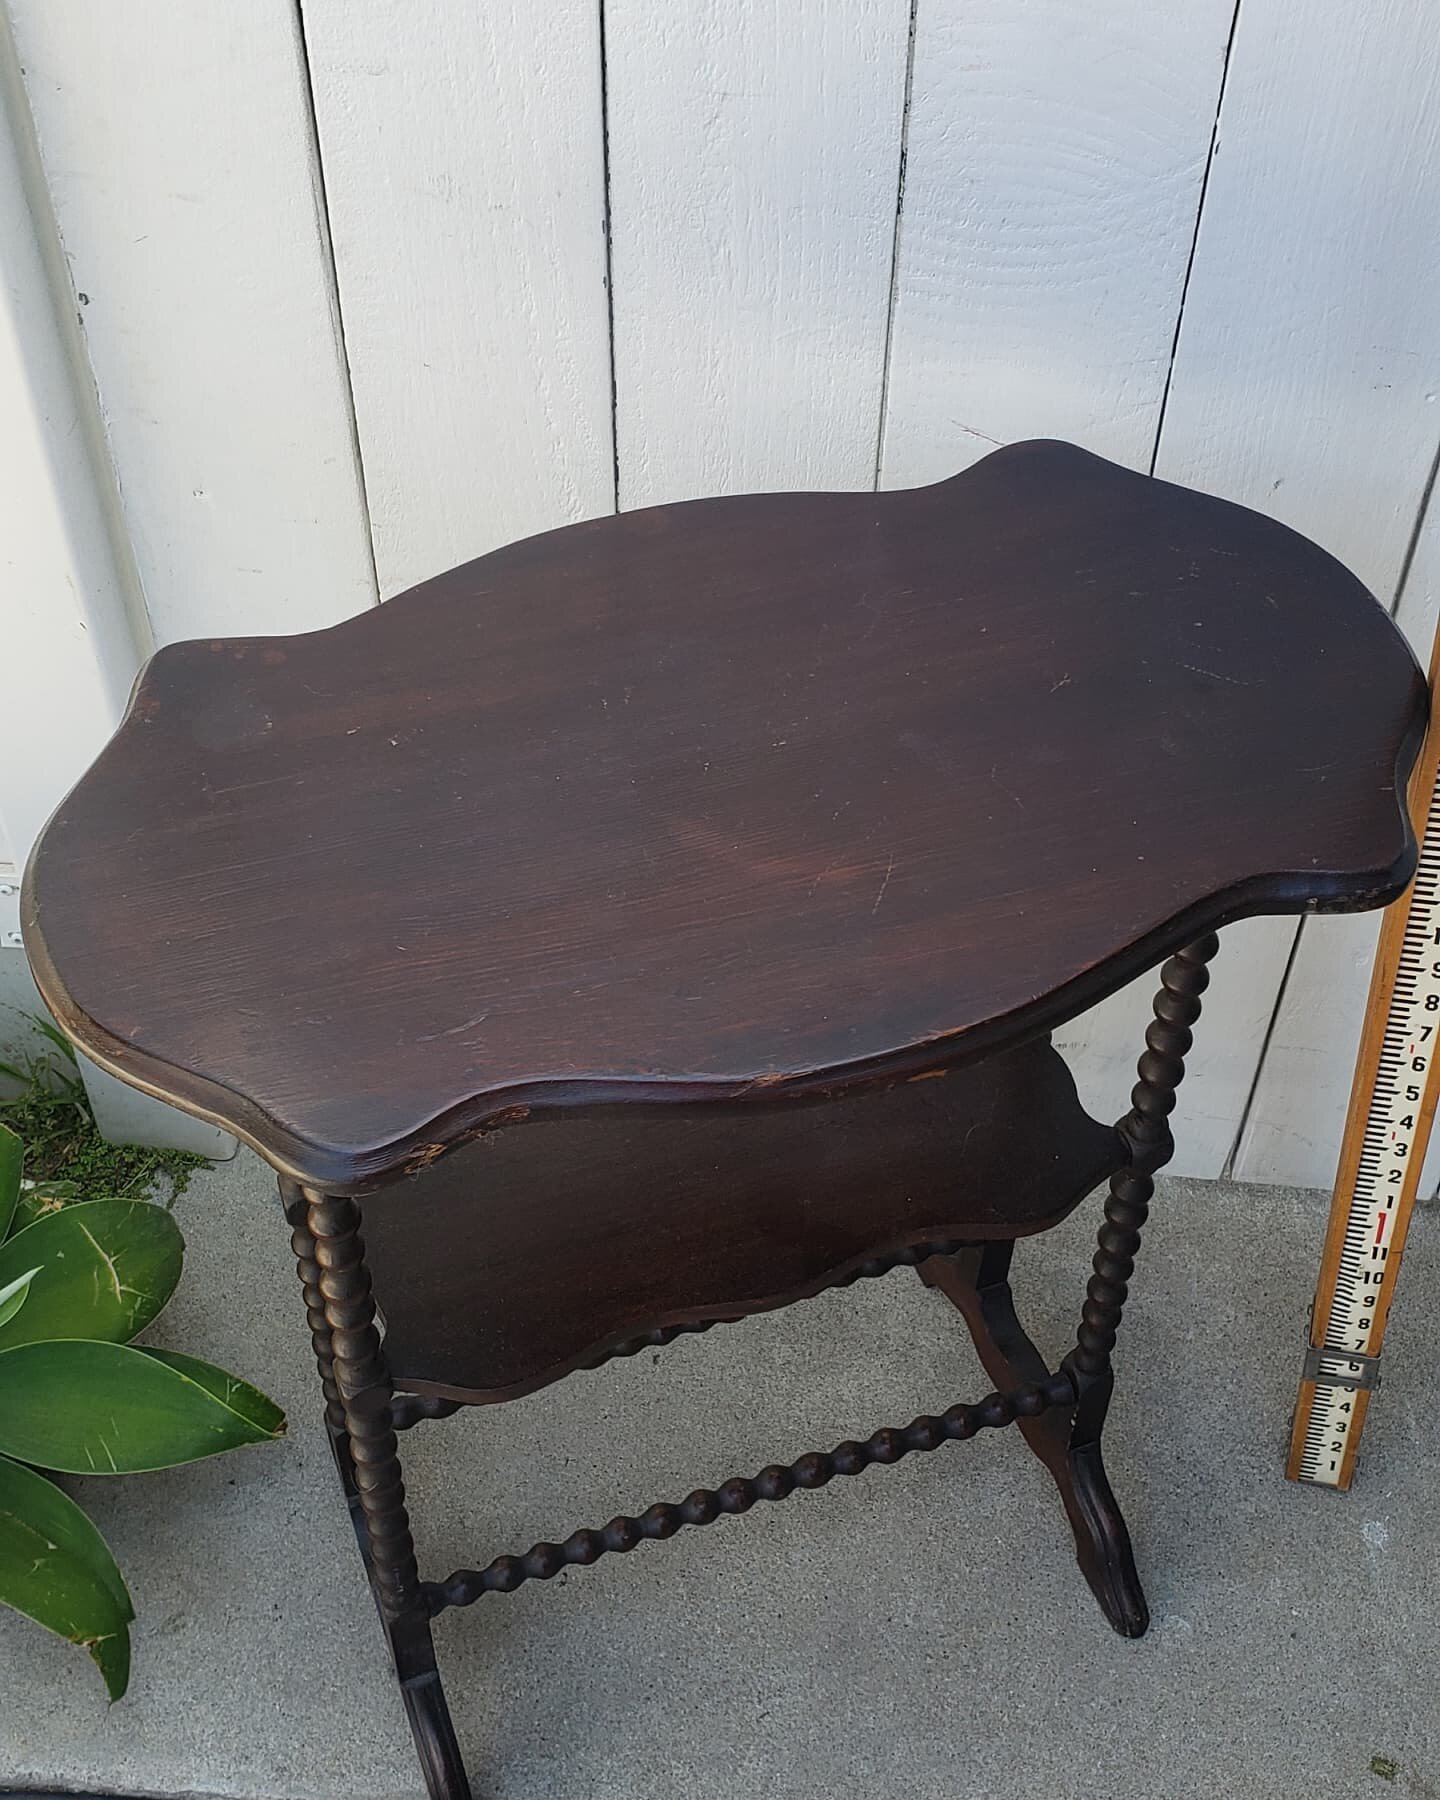 $125. Antique Jenny Lind- Style Spindle Side Table console desk furniture home decor. 28&quot; tall 26&quot; wide 15&quot; deep. 
Plus tax.
This item is located in my Antique Mall booth in the city or Orange. Text Message (don't call) for address and